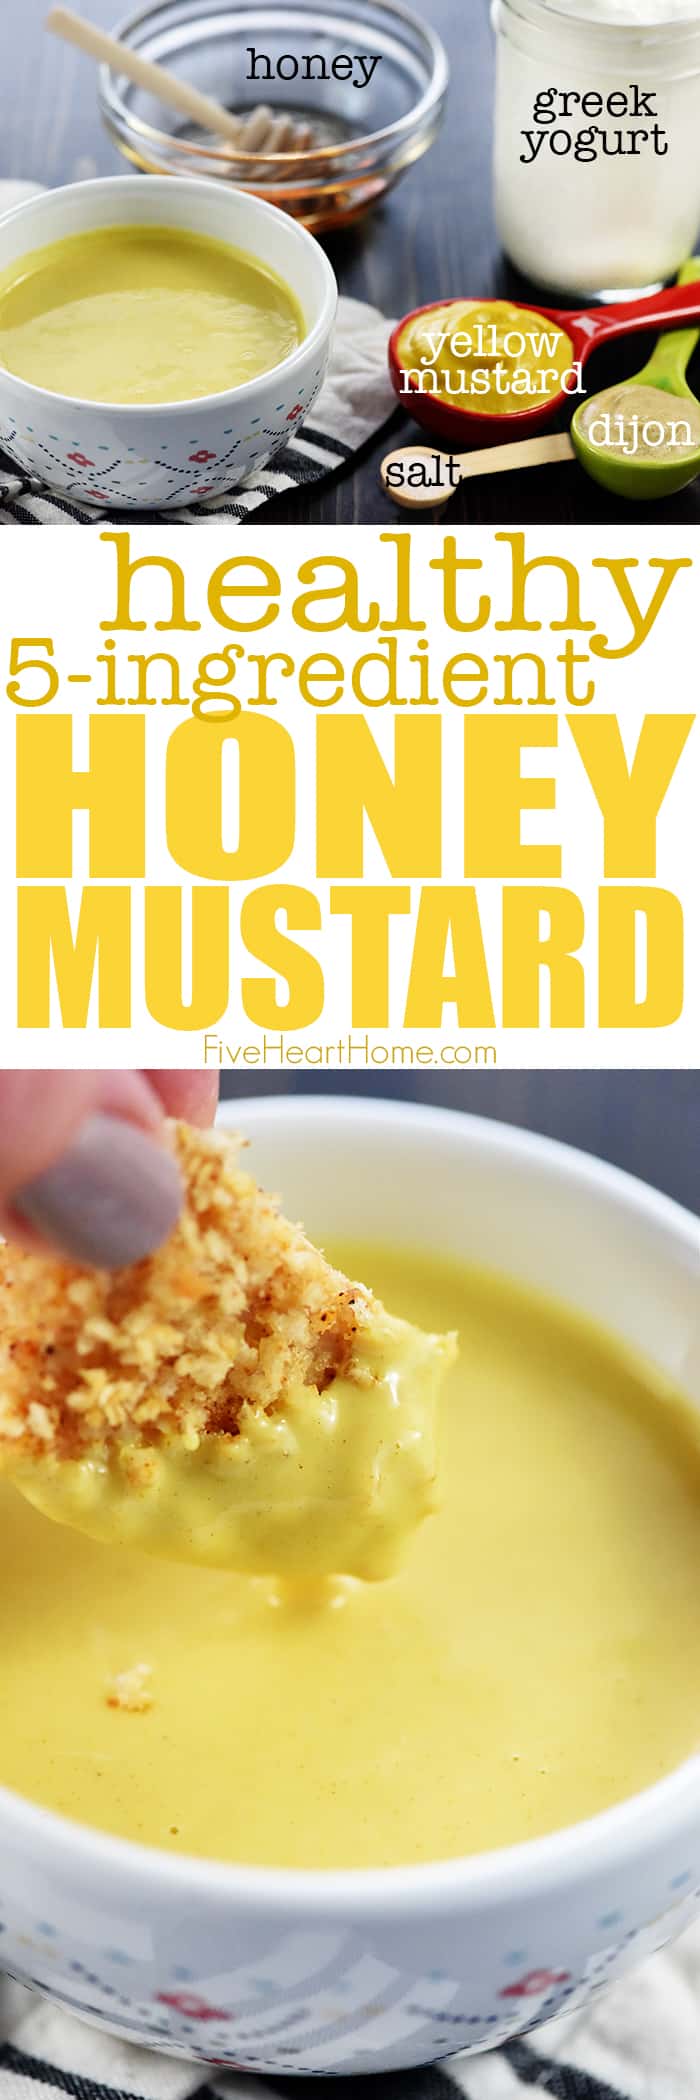 Healthy Homemade Honey Mustard ~ this lightened-up dipping sauce recipe comes together in a few minutes with only five ingredients, including healthy Greek yogurt and no mayo! | FiveHeartHome.com via @fivehearthome